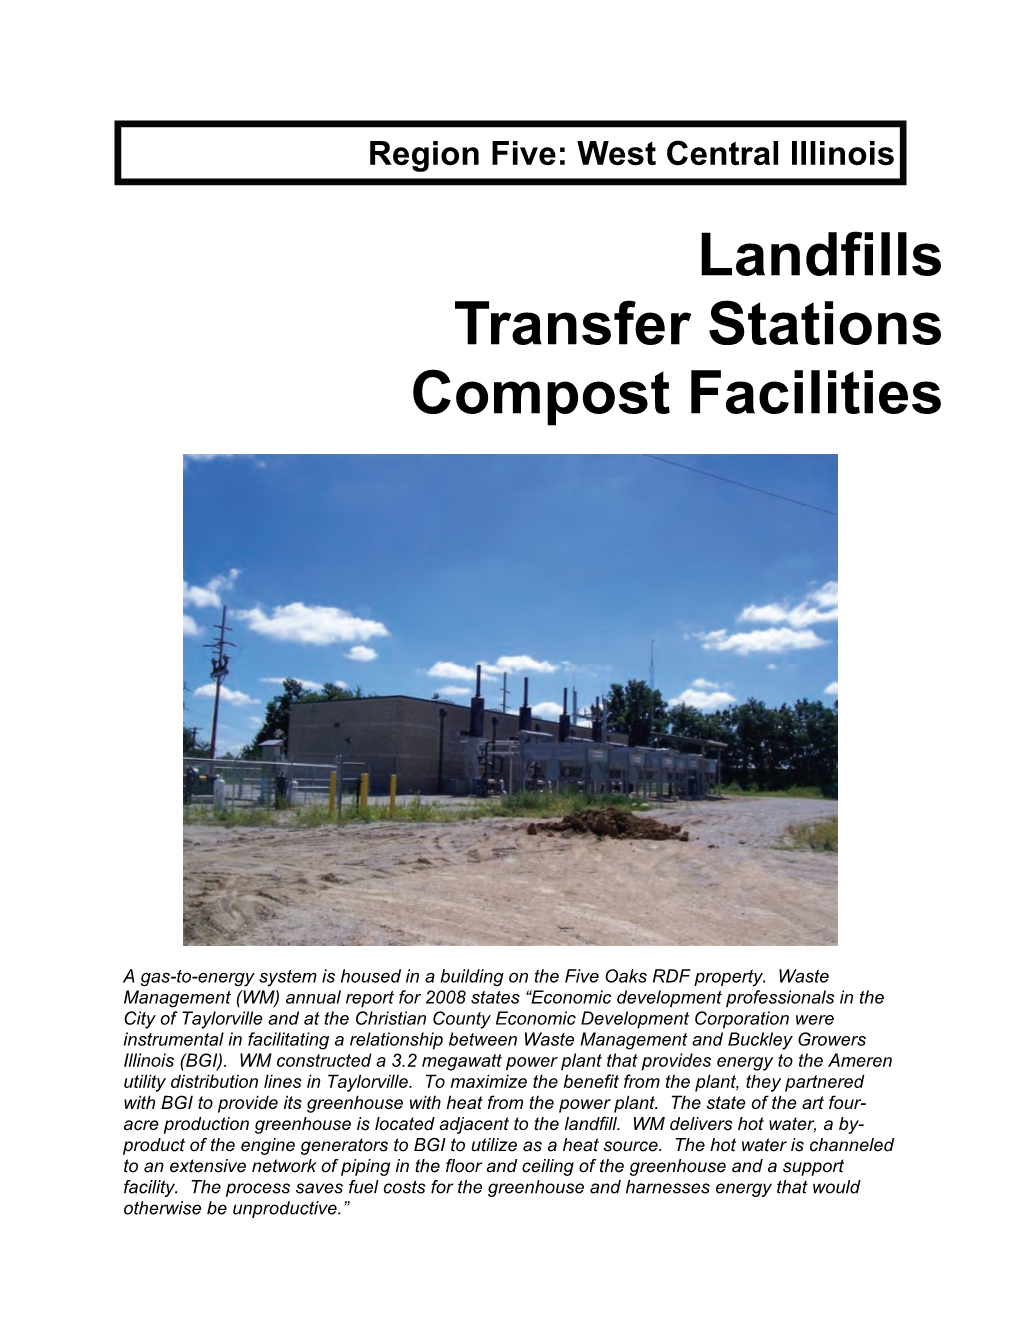 Region Five: West Central Illinois Landfills Transfer Stations Compost Facilities